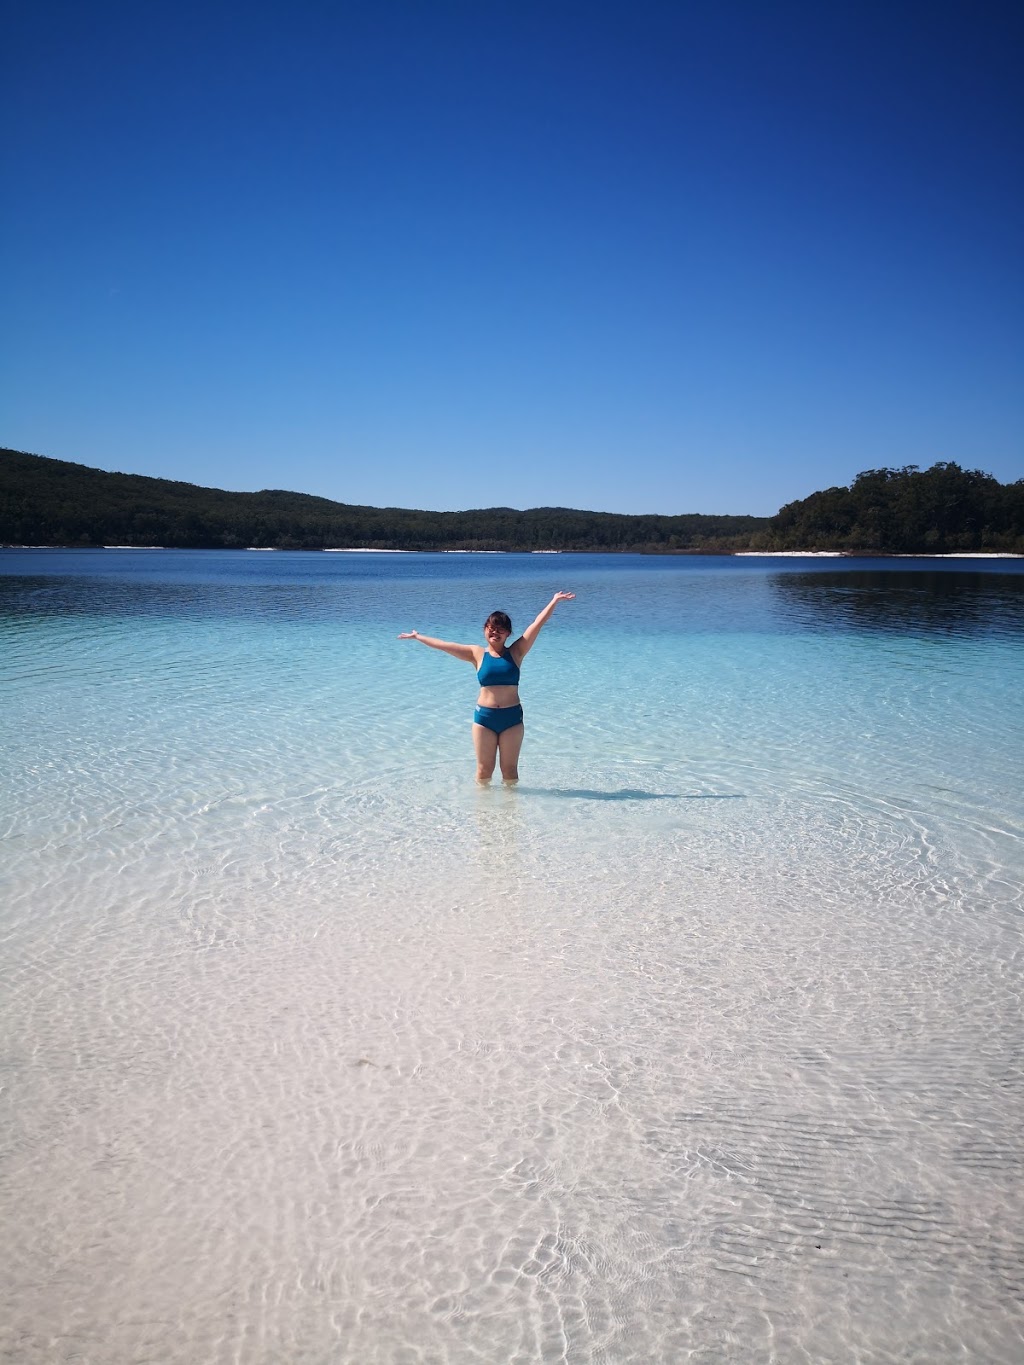 Sunrover Expeditions | 25.598699, 153.092112, Fraser Island QLD 4581, Australia | Phone: (07) 3203 4241